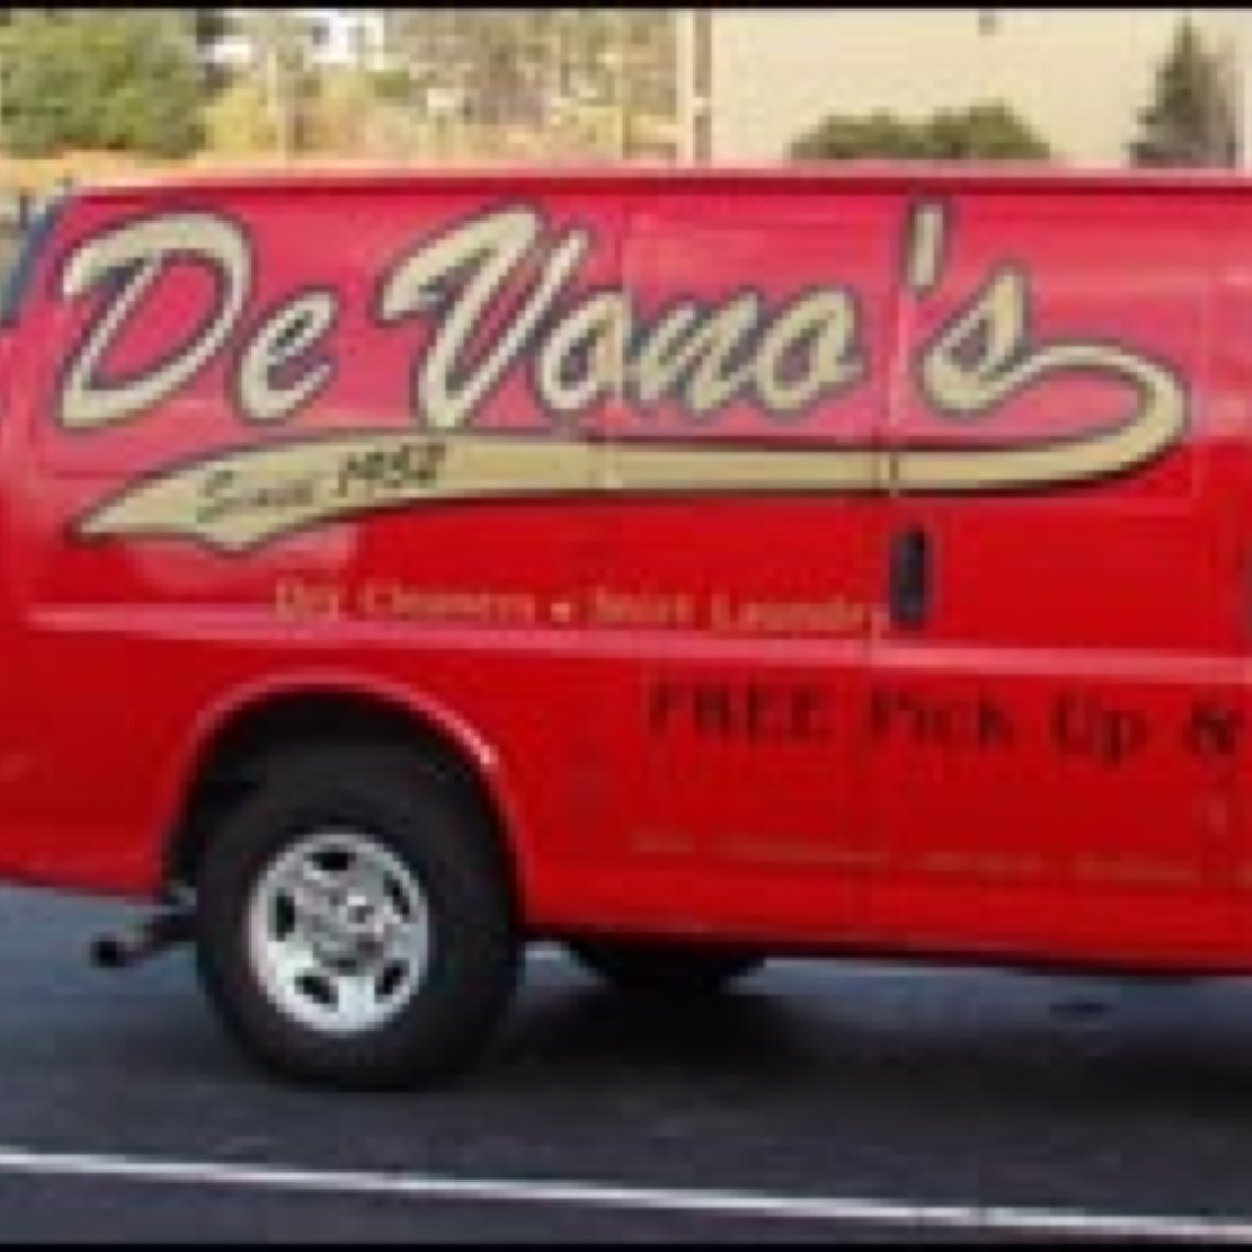 Established in 1947, DeVono's always takes pride in your appearance. DeVono's also offers free pick up and delivery service for your convenience.